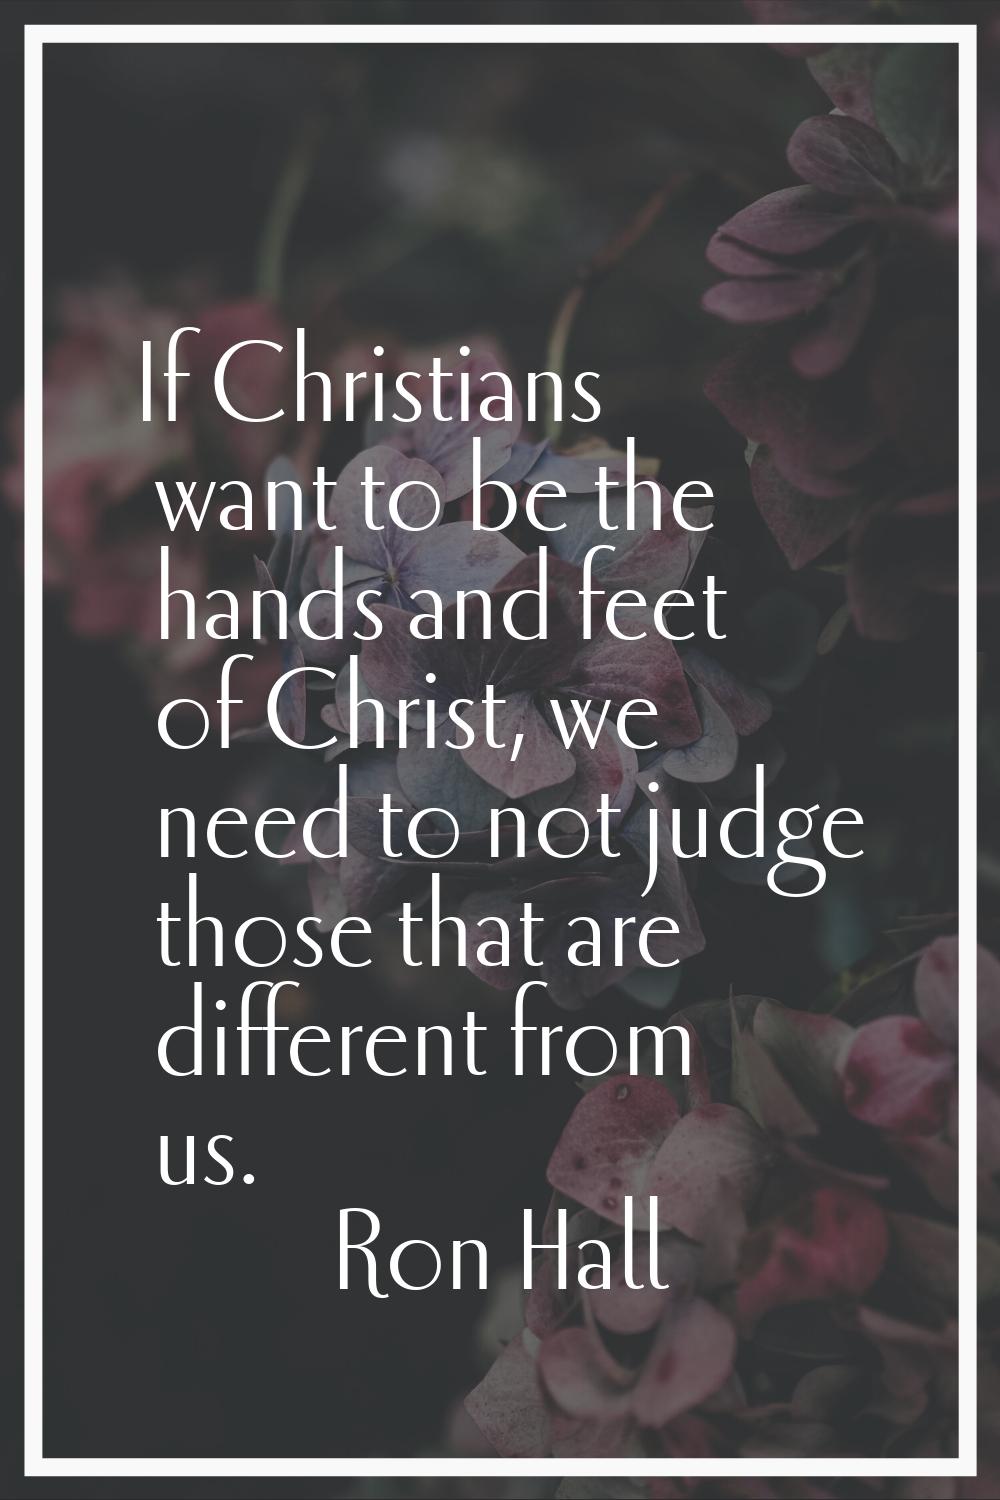 If Christians want to be the hands and feet of Christ, we need to not judge those that are differen